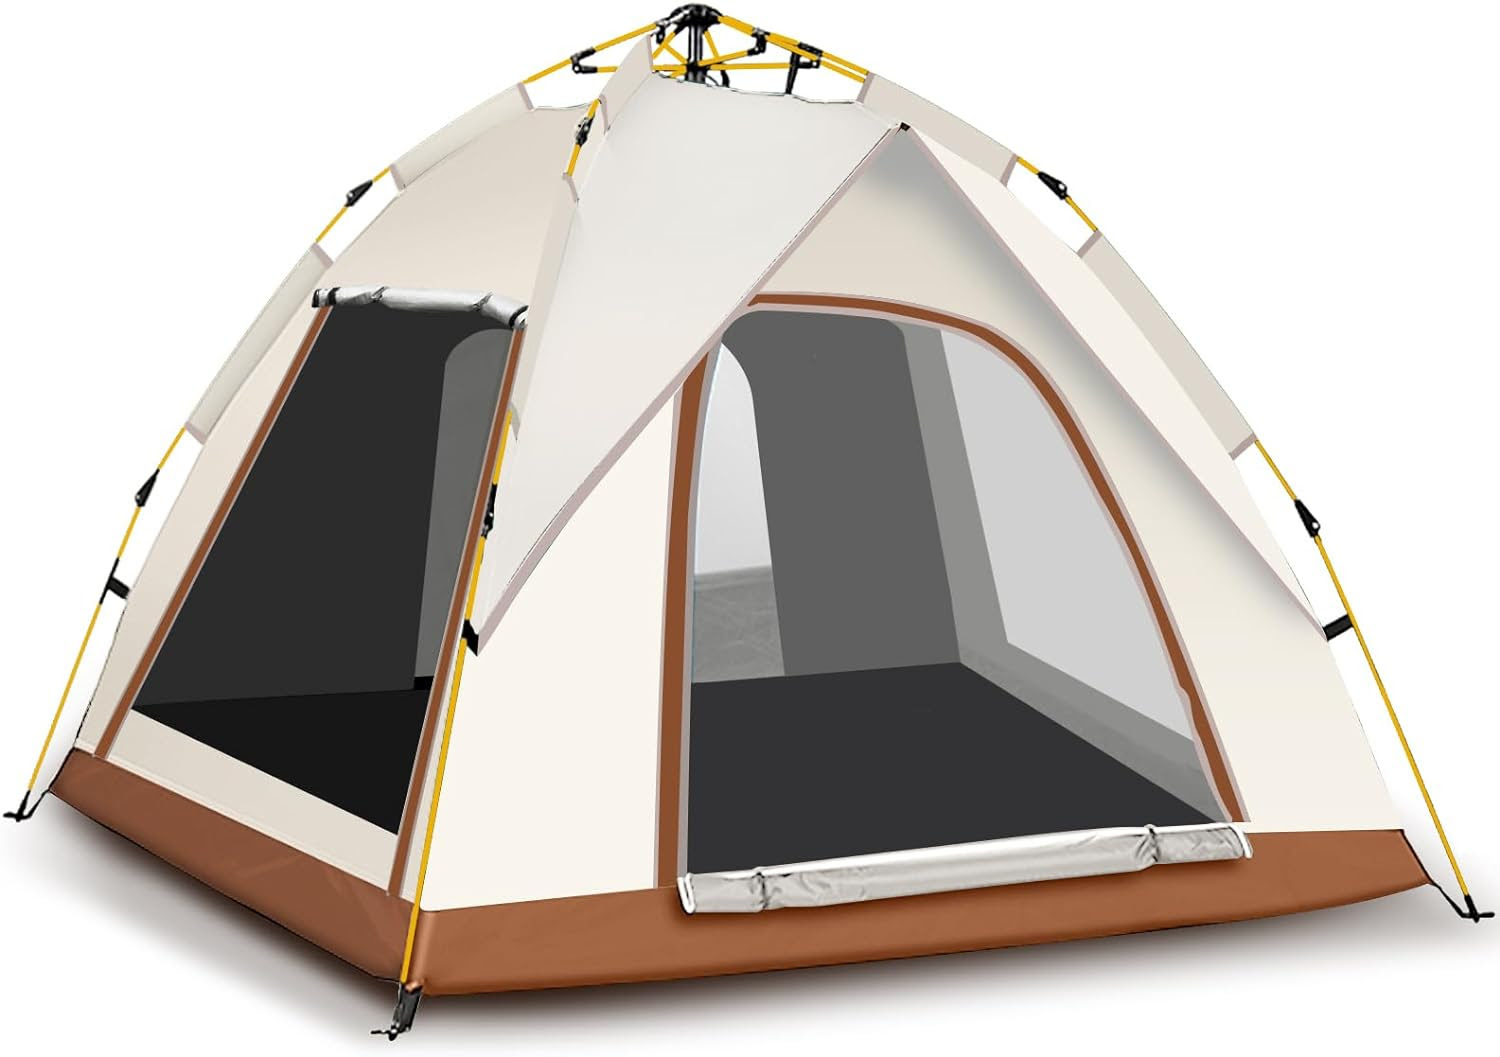 Waterproof 2/3/4 Person Pop Up Camping Tent. 393units. EXW Los Angeles $33.00 unit.